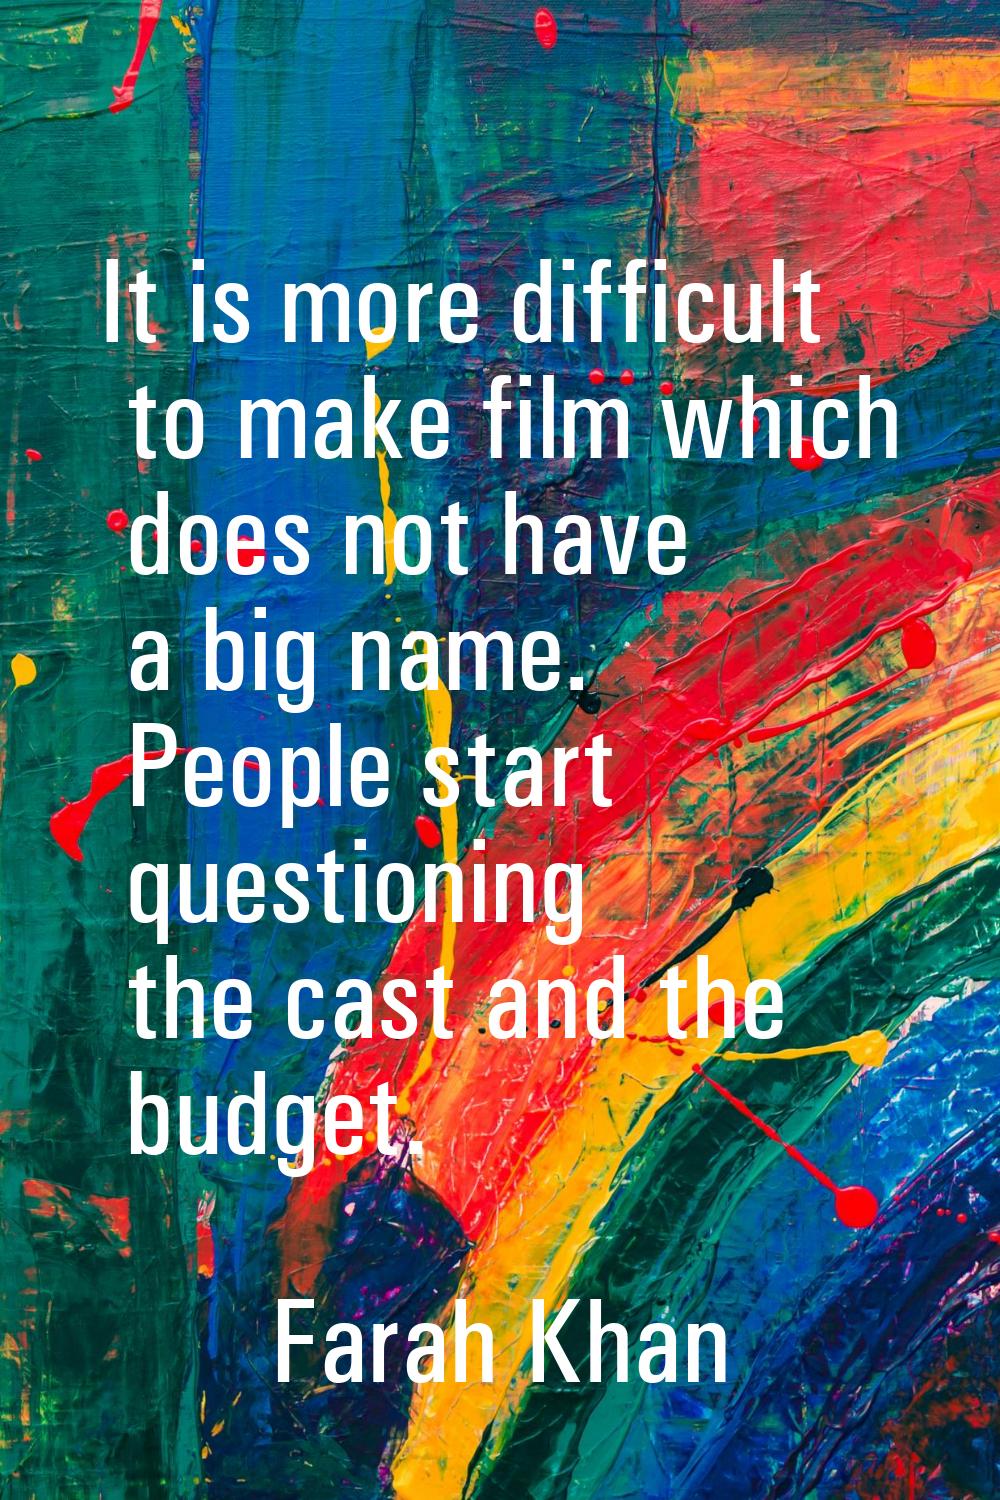 It is more difficult to make film which does not have a big name. People start questioning the cast